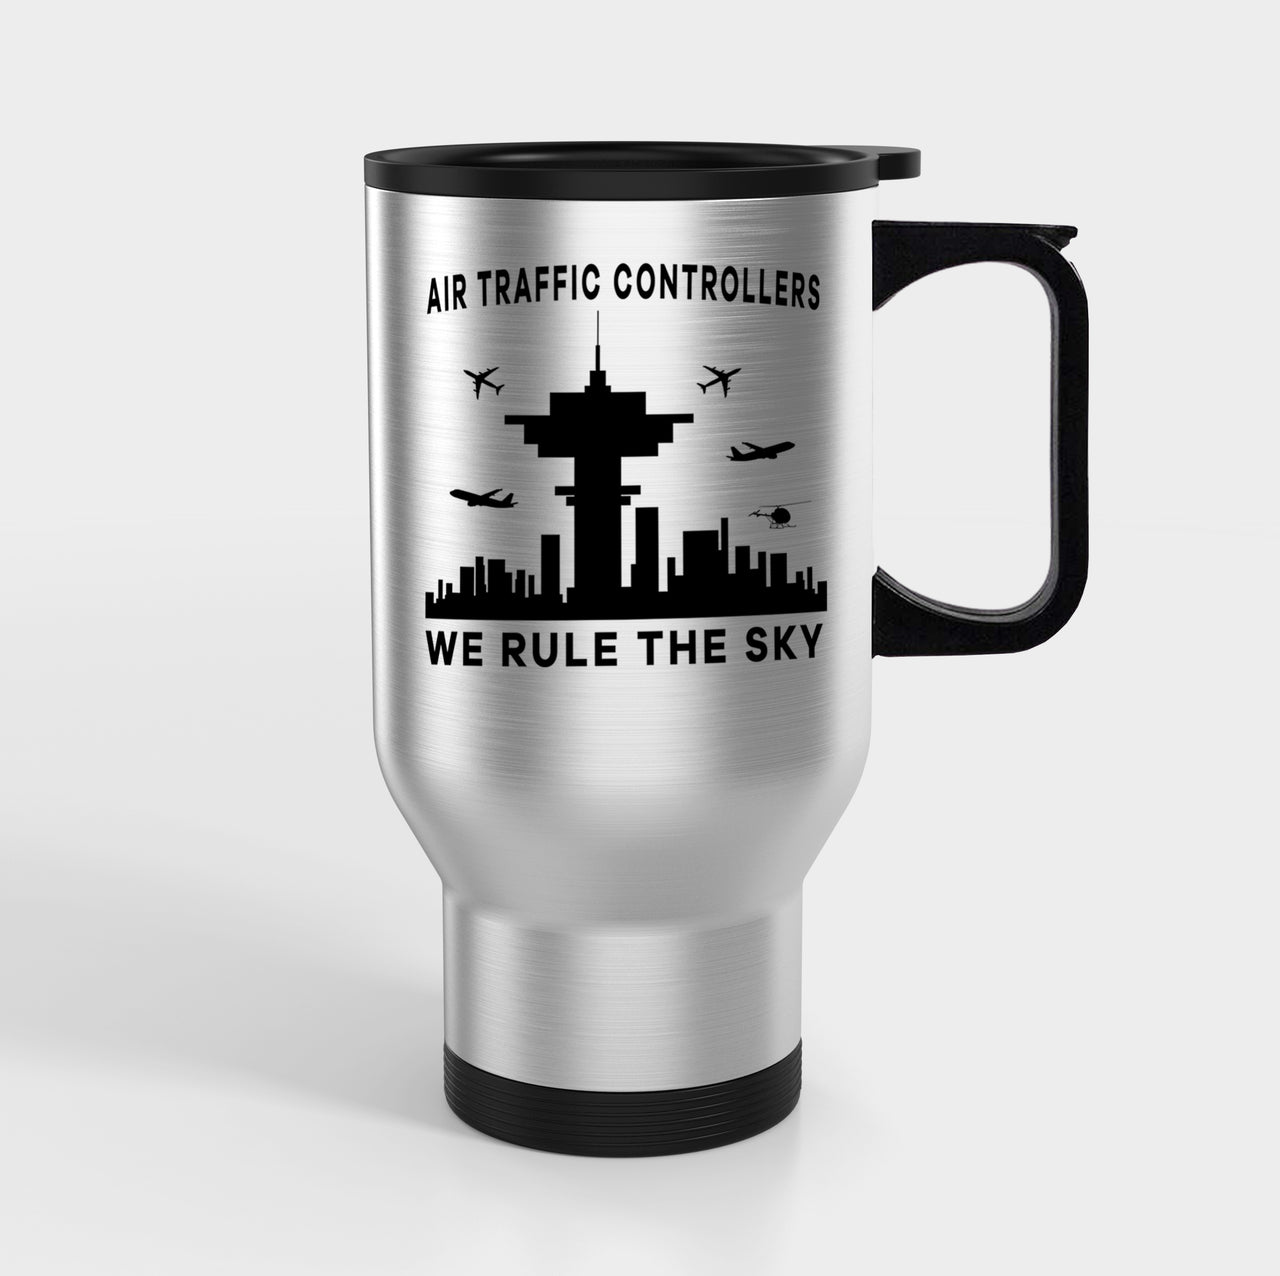 Air Traffic Controllers - We Rule The Sky Designed Travel Mugs (With Holder)